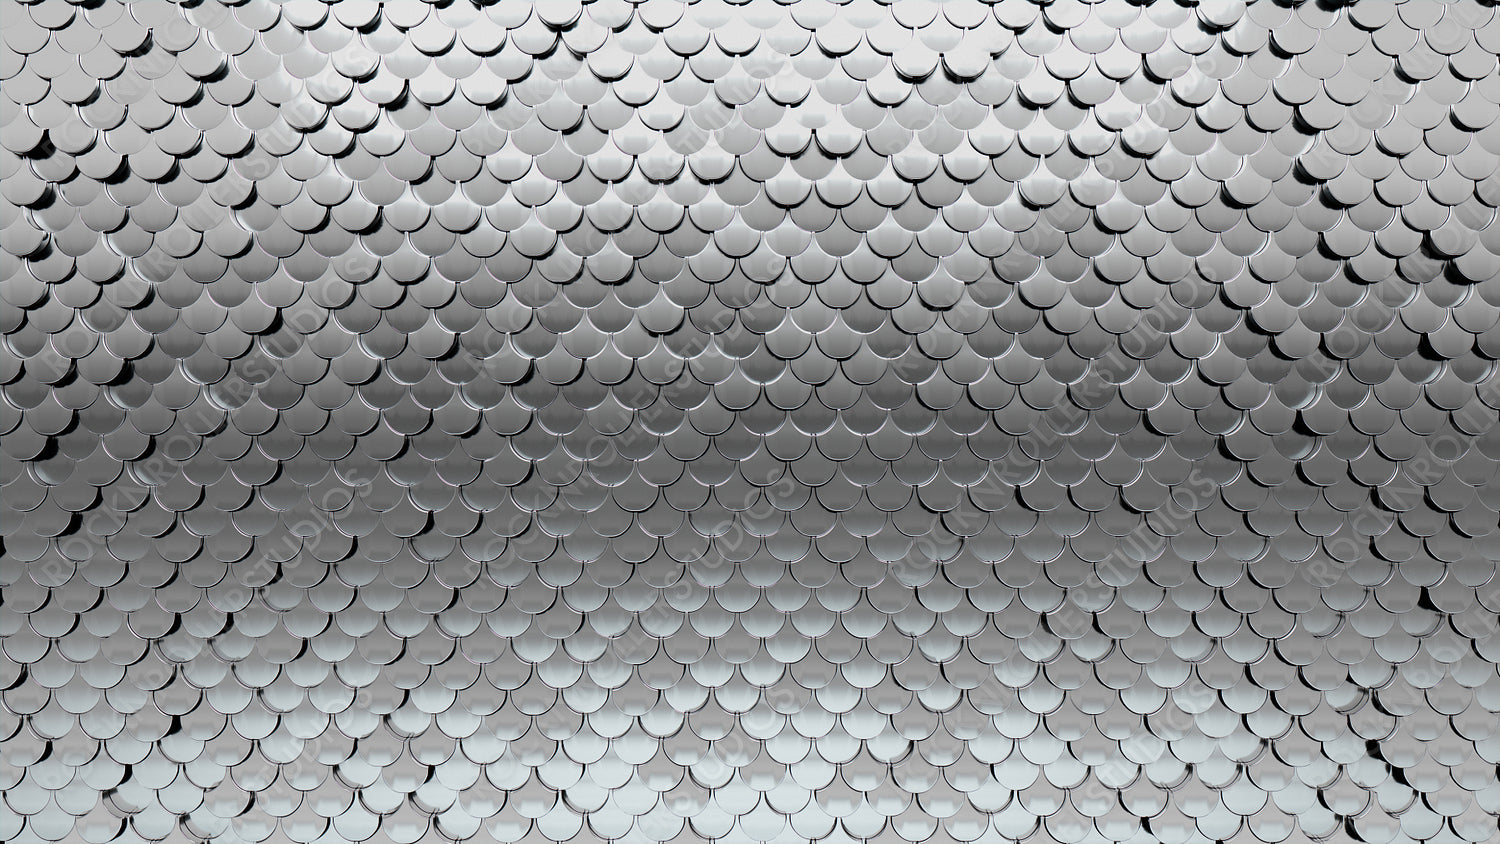 3D Tiles arranged to create a Silver wall. Glossy, Luxurious Background formed from Fish Scale blocks. 3D Render